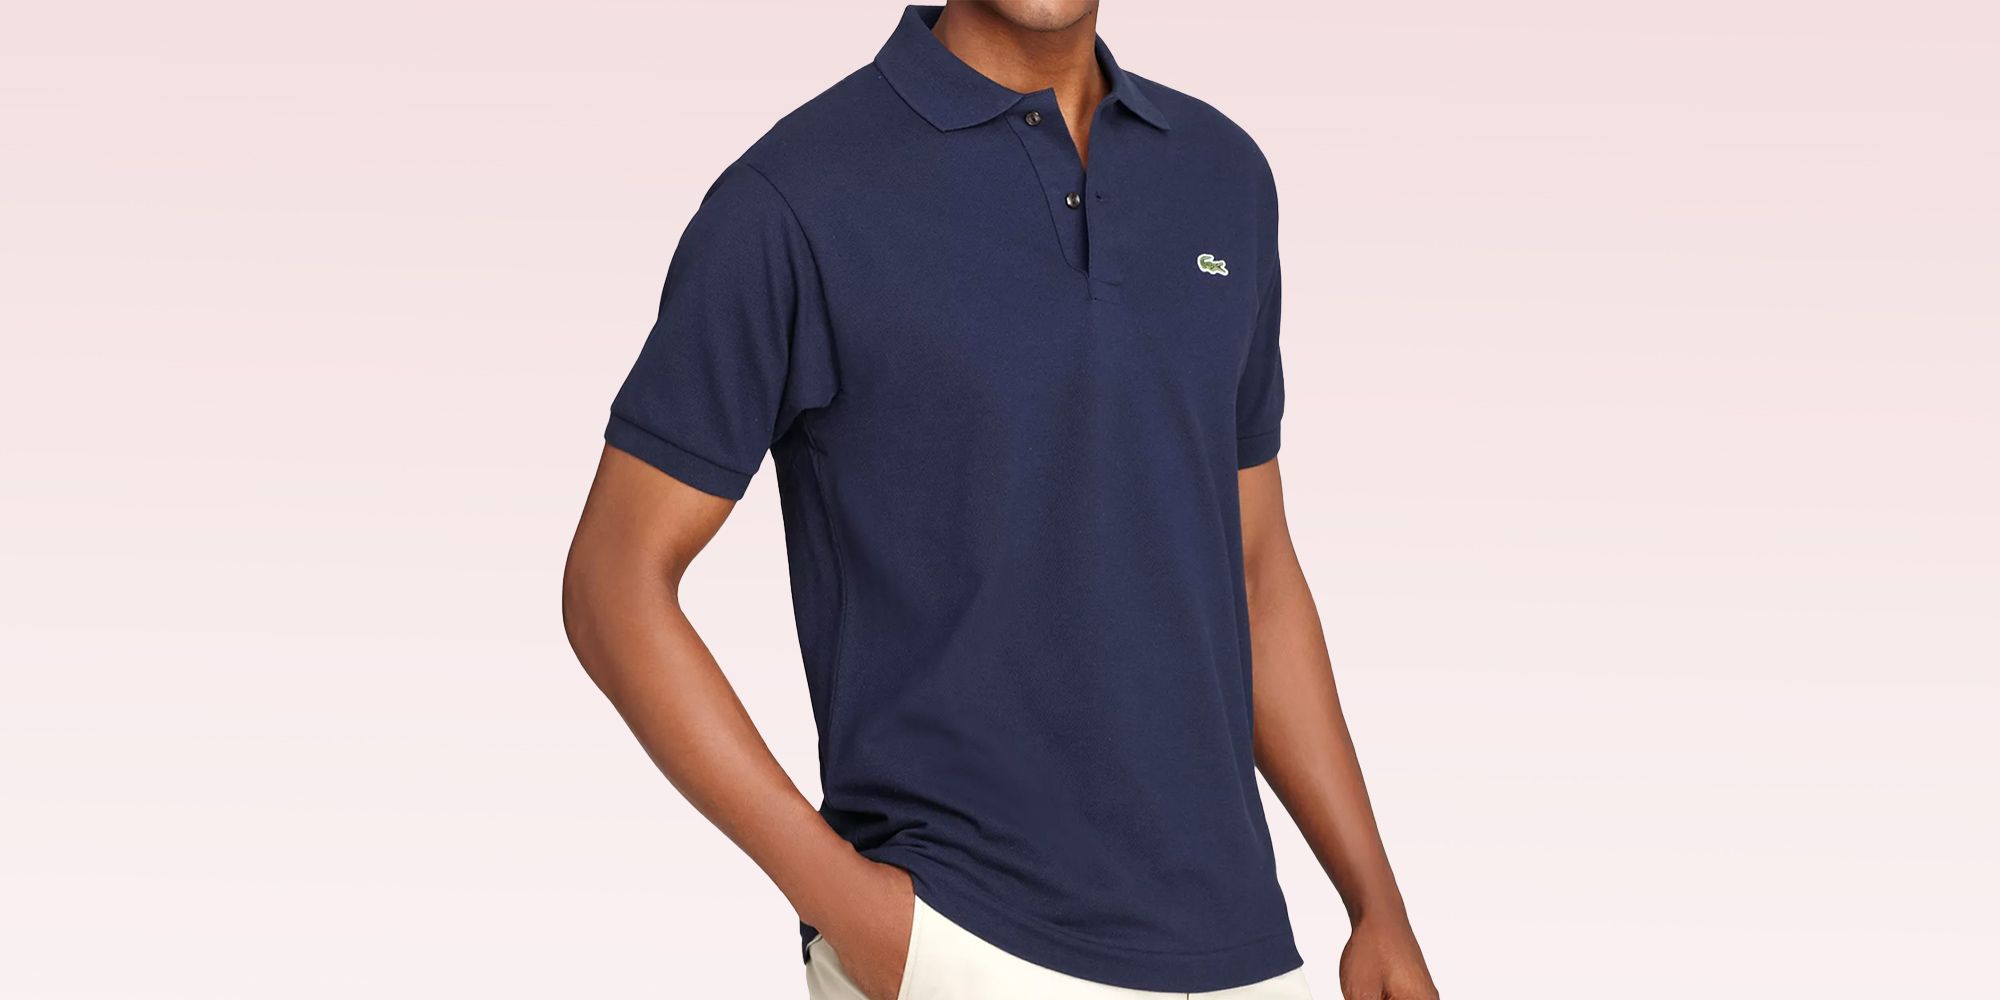 You Can Deep Right Signature Lacoste\'s at Prime Discount Polo Day Now, Courtesy a Get of